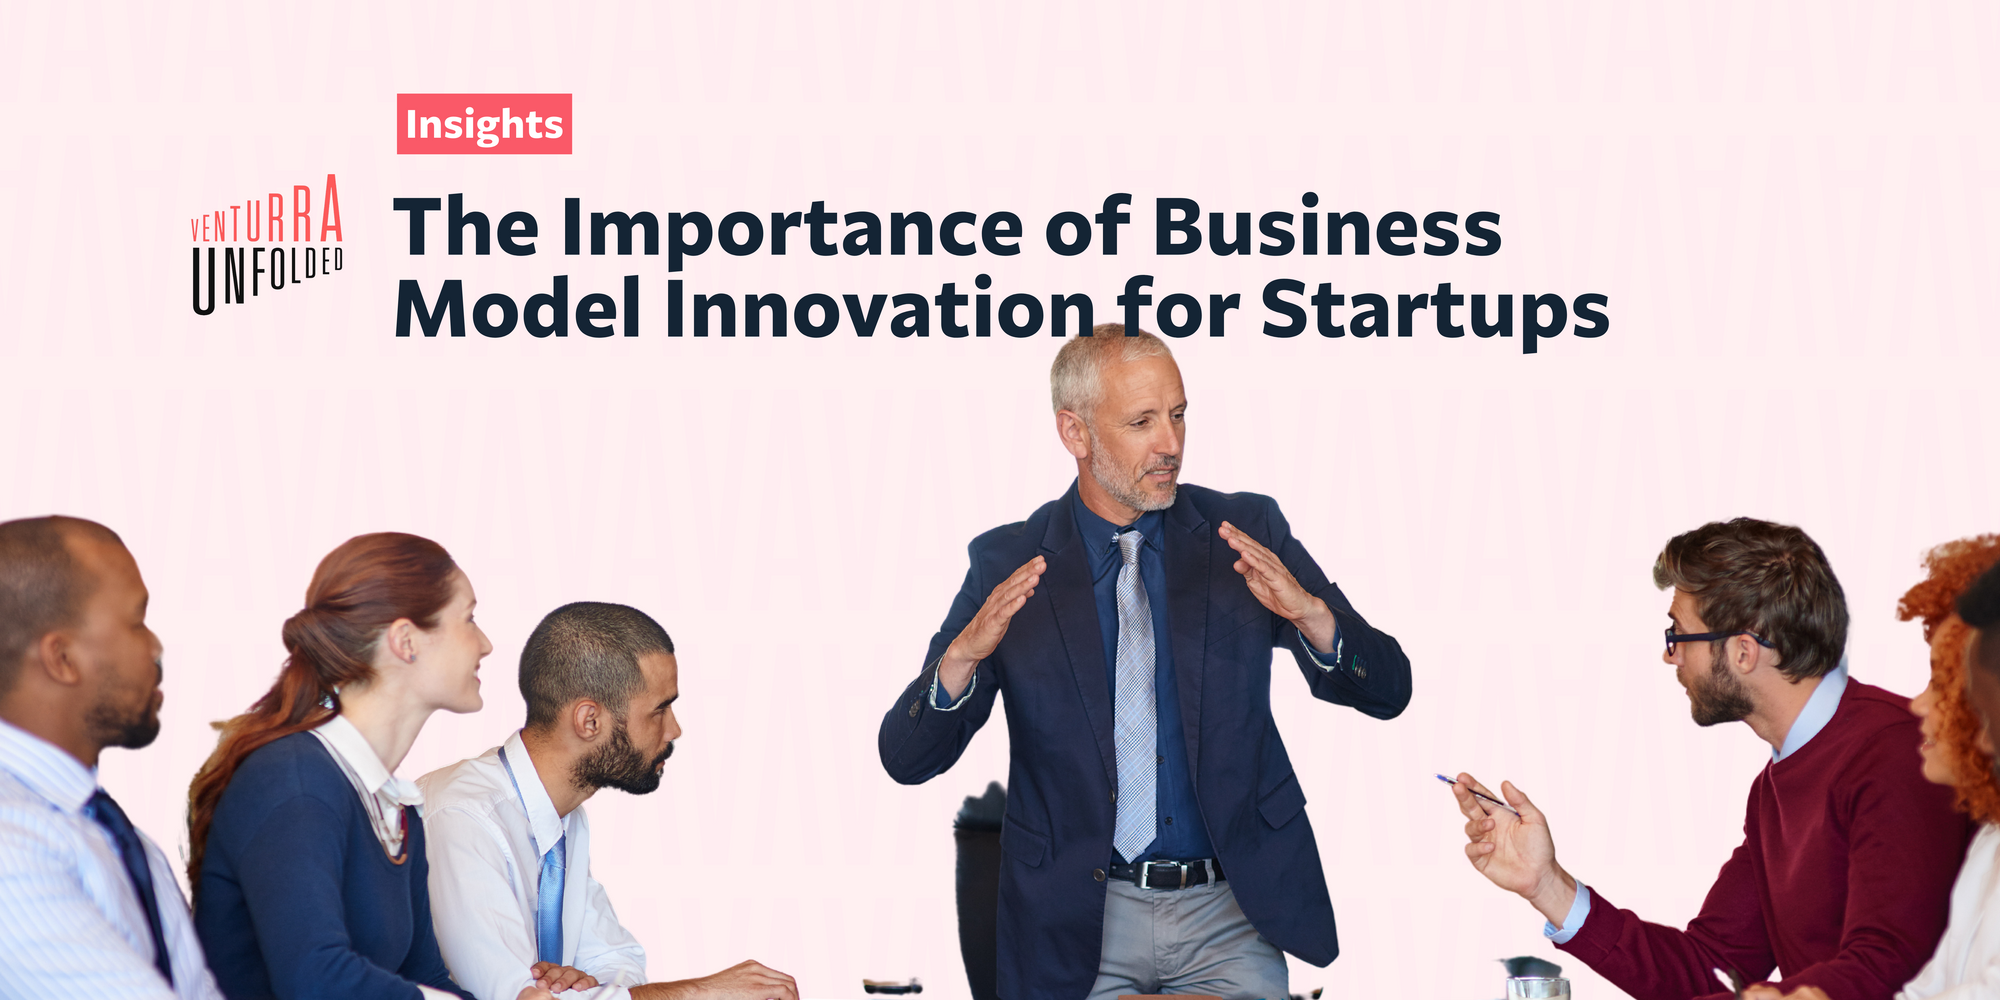 The Importance of Business Model Innovation for Startups